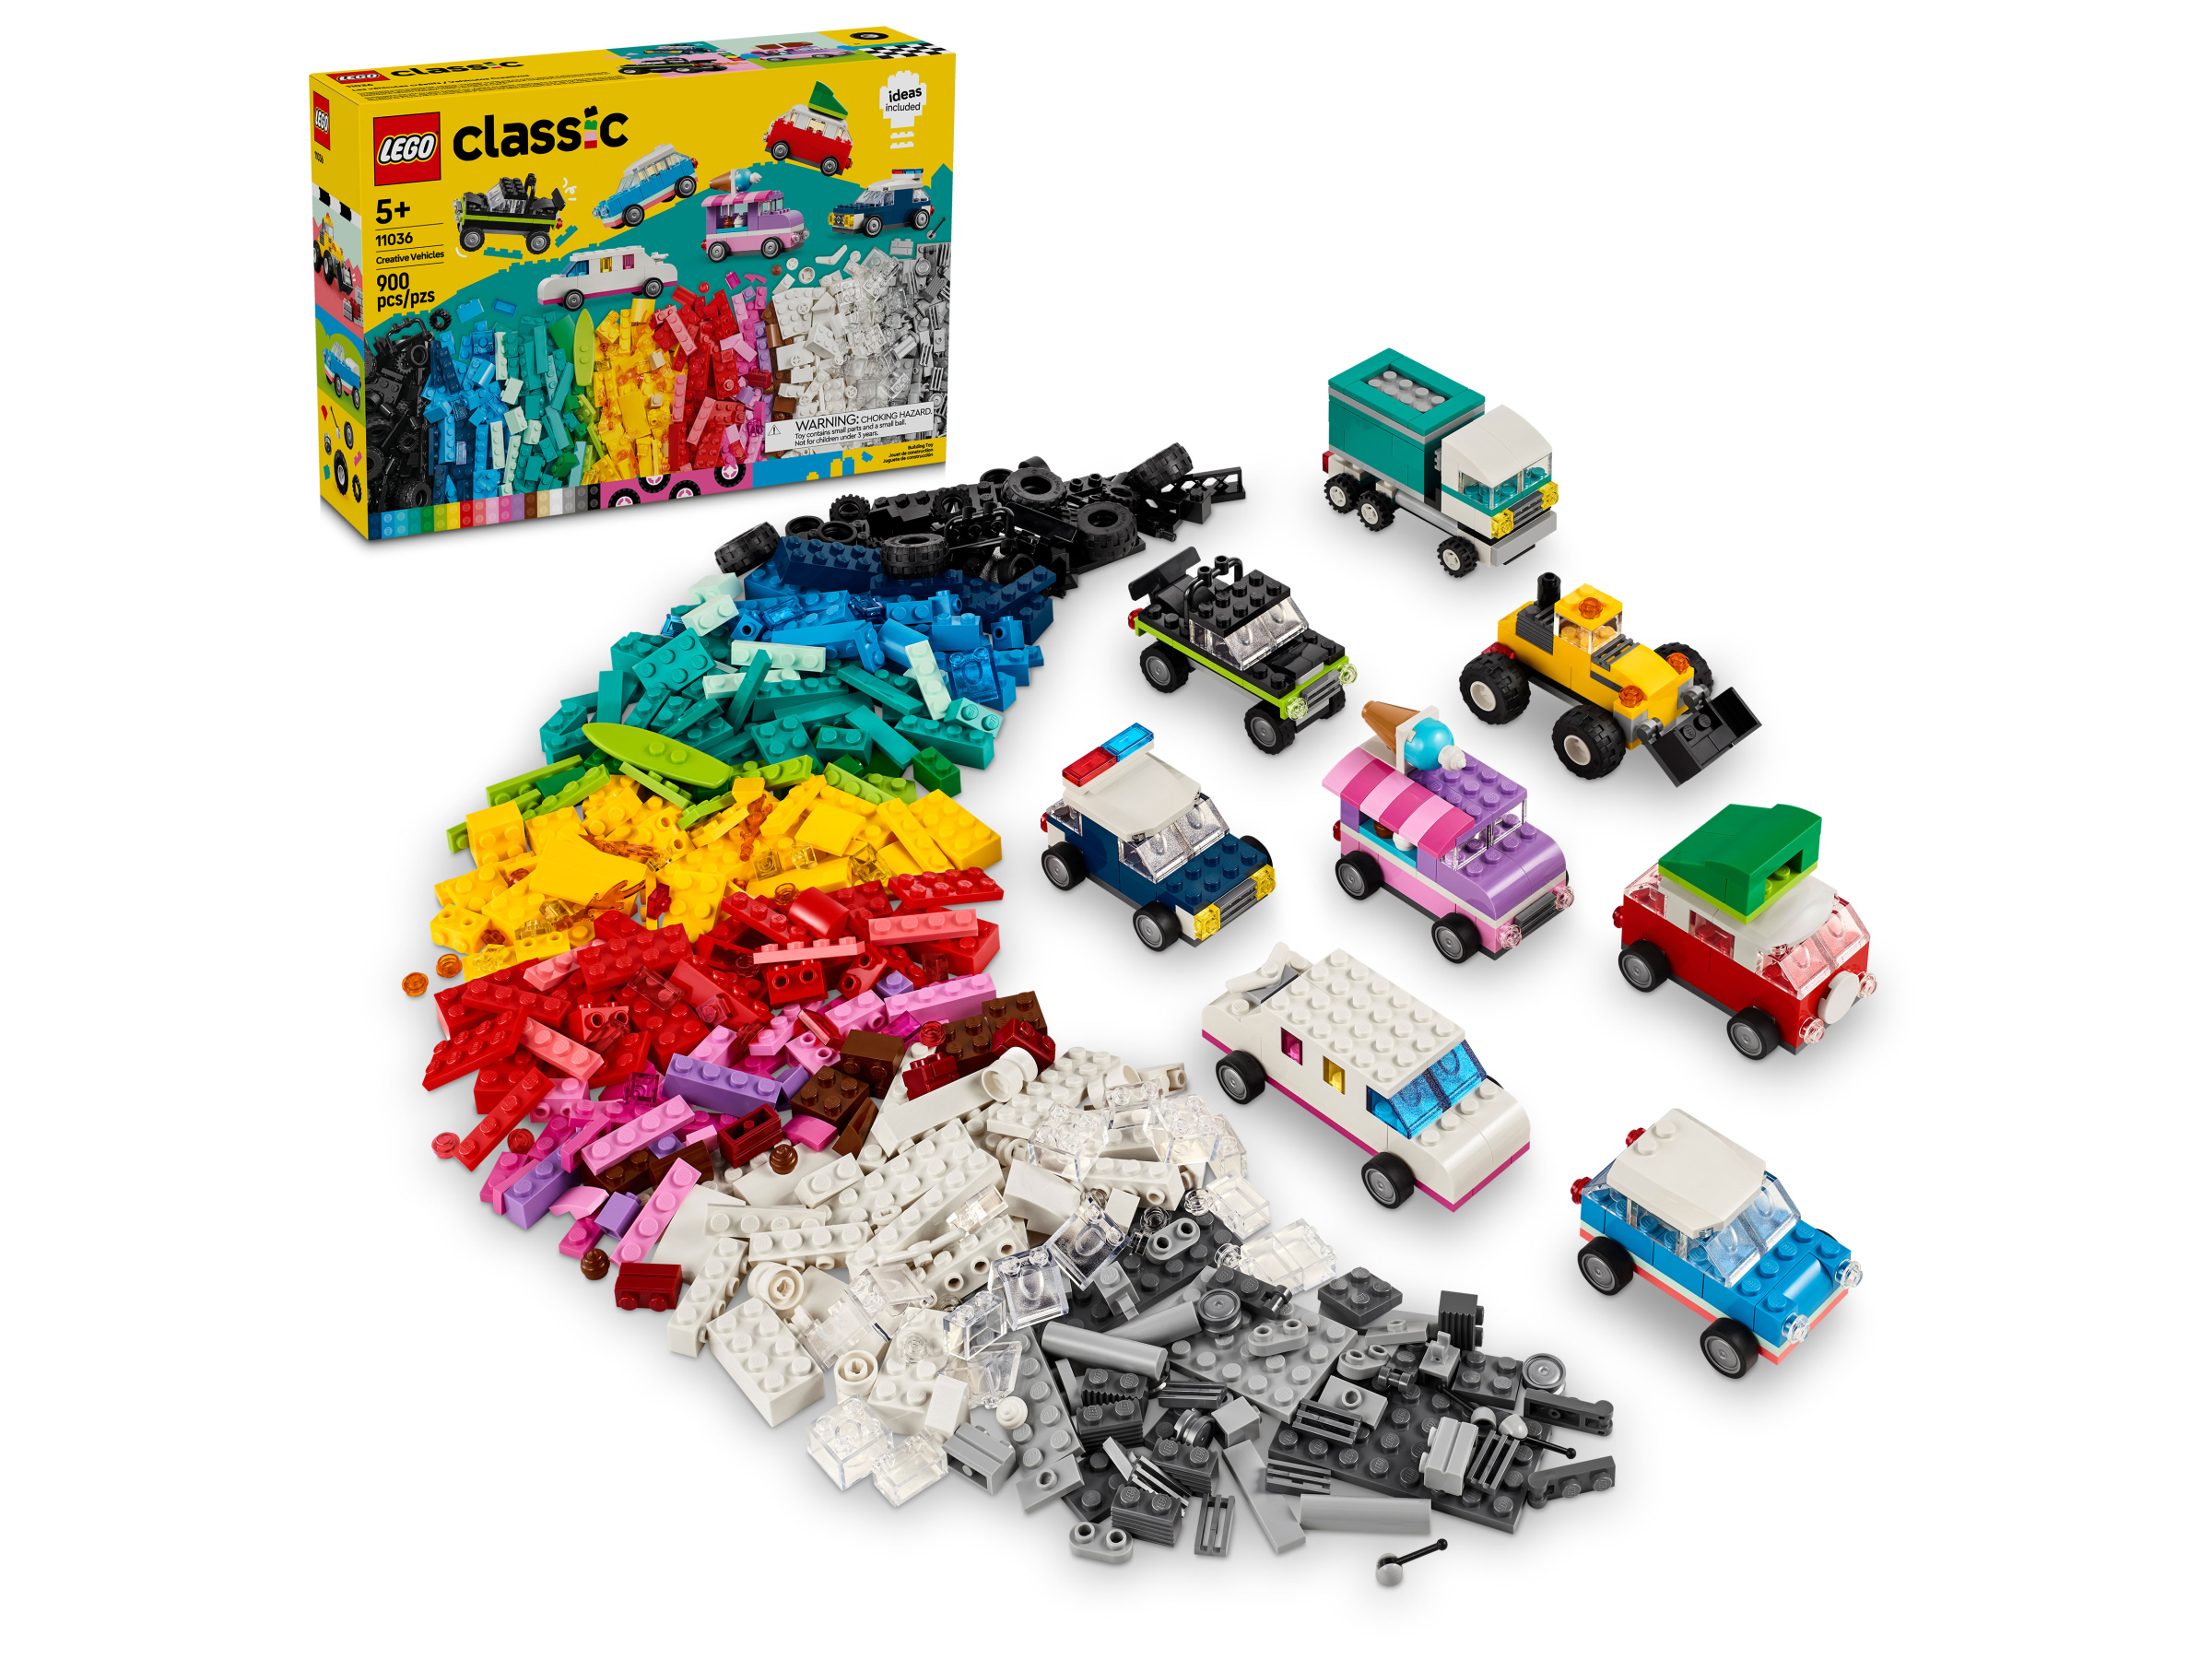 LEGO® Classic toys - Free building instructions